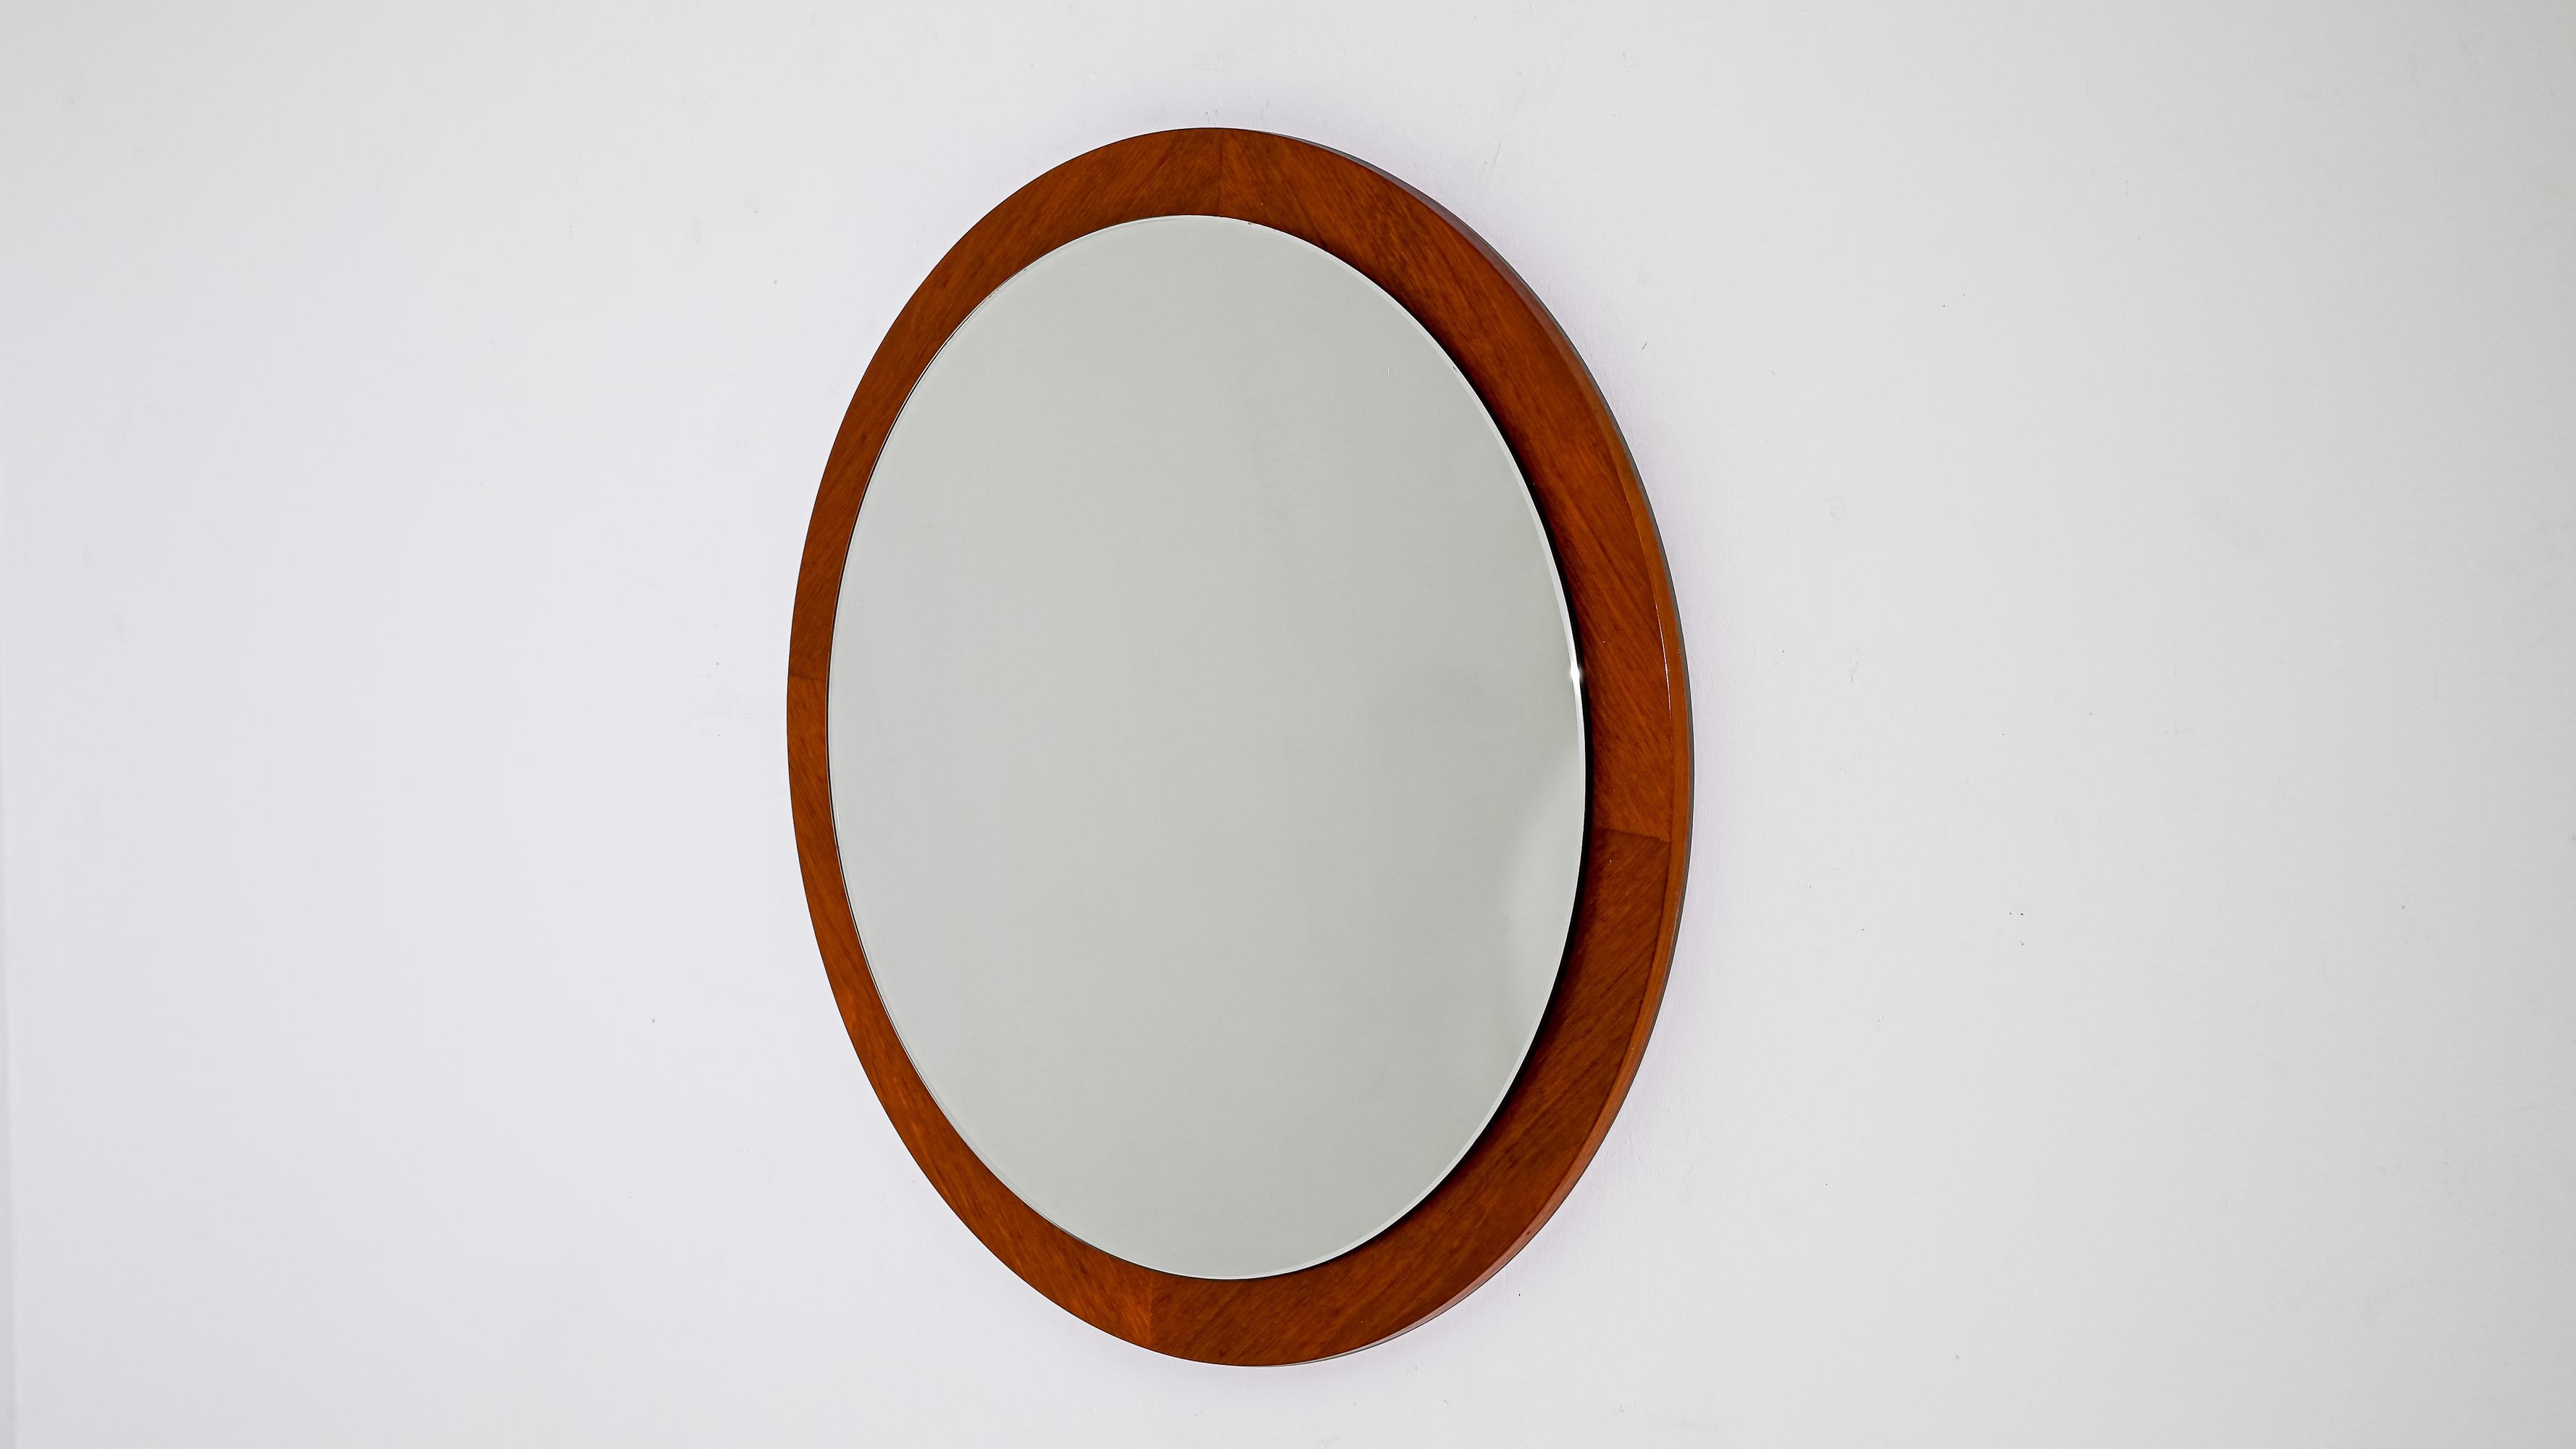 Elevate your space with the timeless elegance of this 1960s Danish Teak Mirror, a true icon of mid-century design. Crafted from rich teak wood, the mirror frame exudes warmth and sophistication, showcasing the natural beauty of the wood grain. The